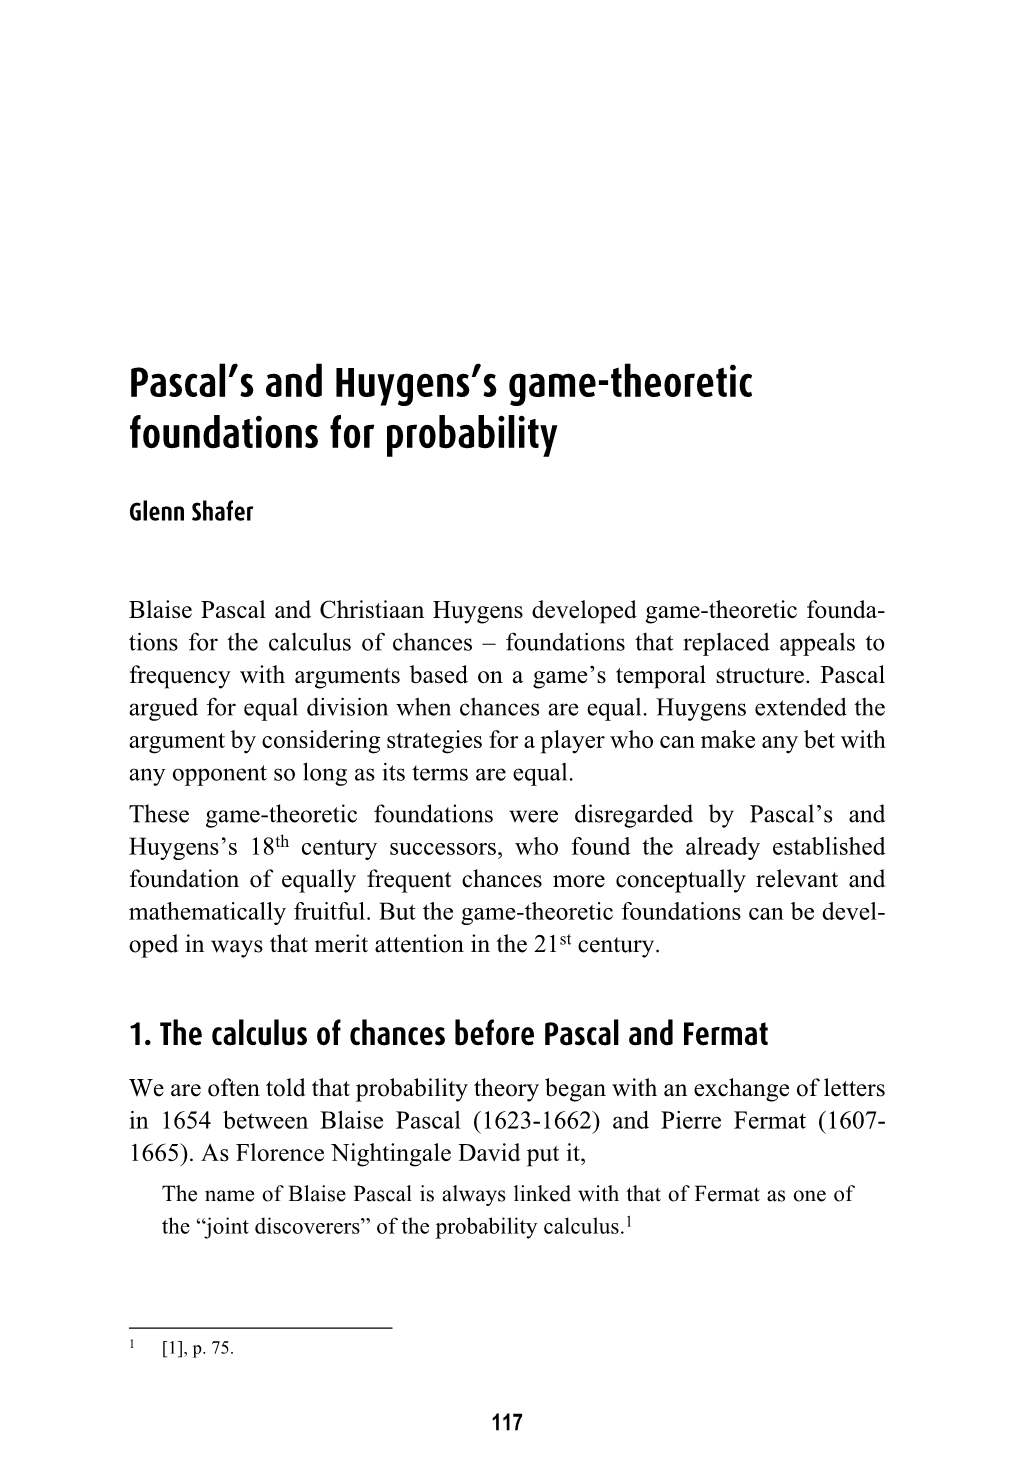 Pascal's and Huygens's Game-Theoretic Foundations for Probability